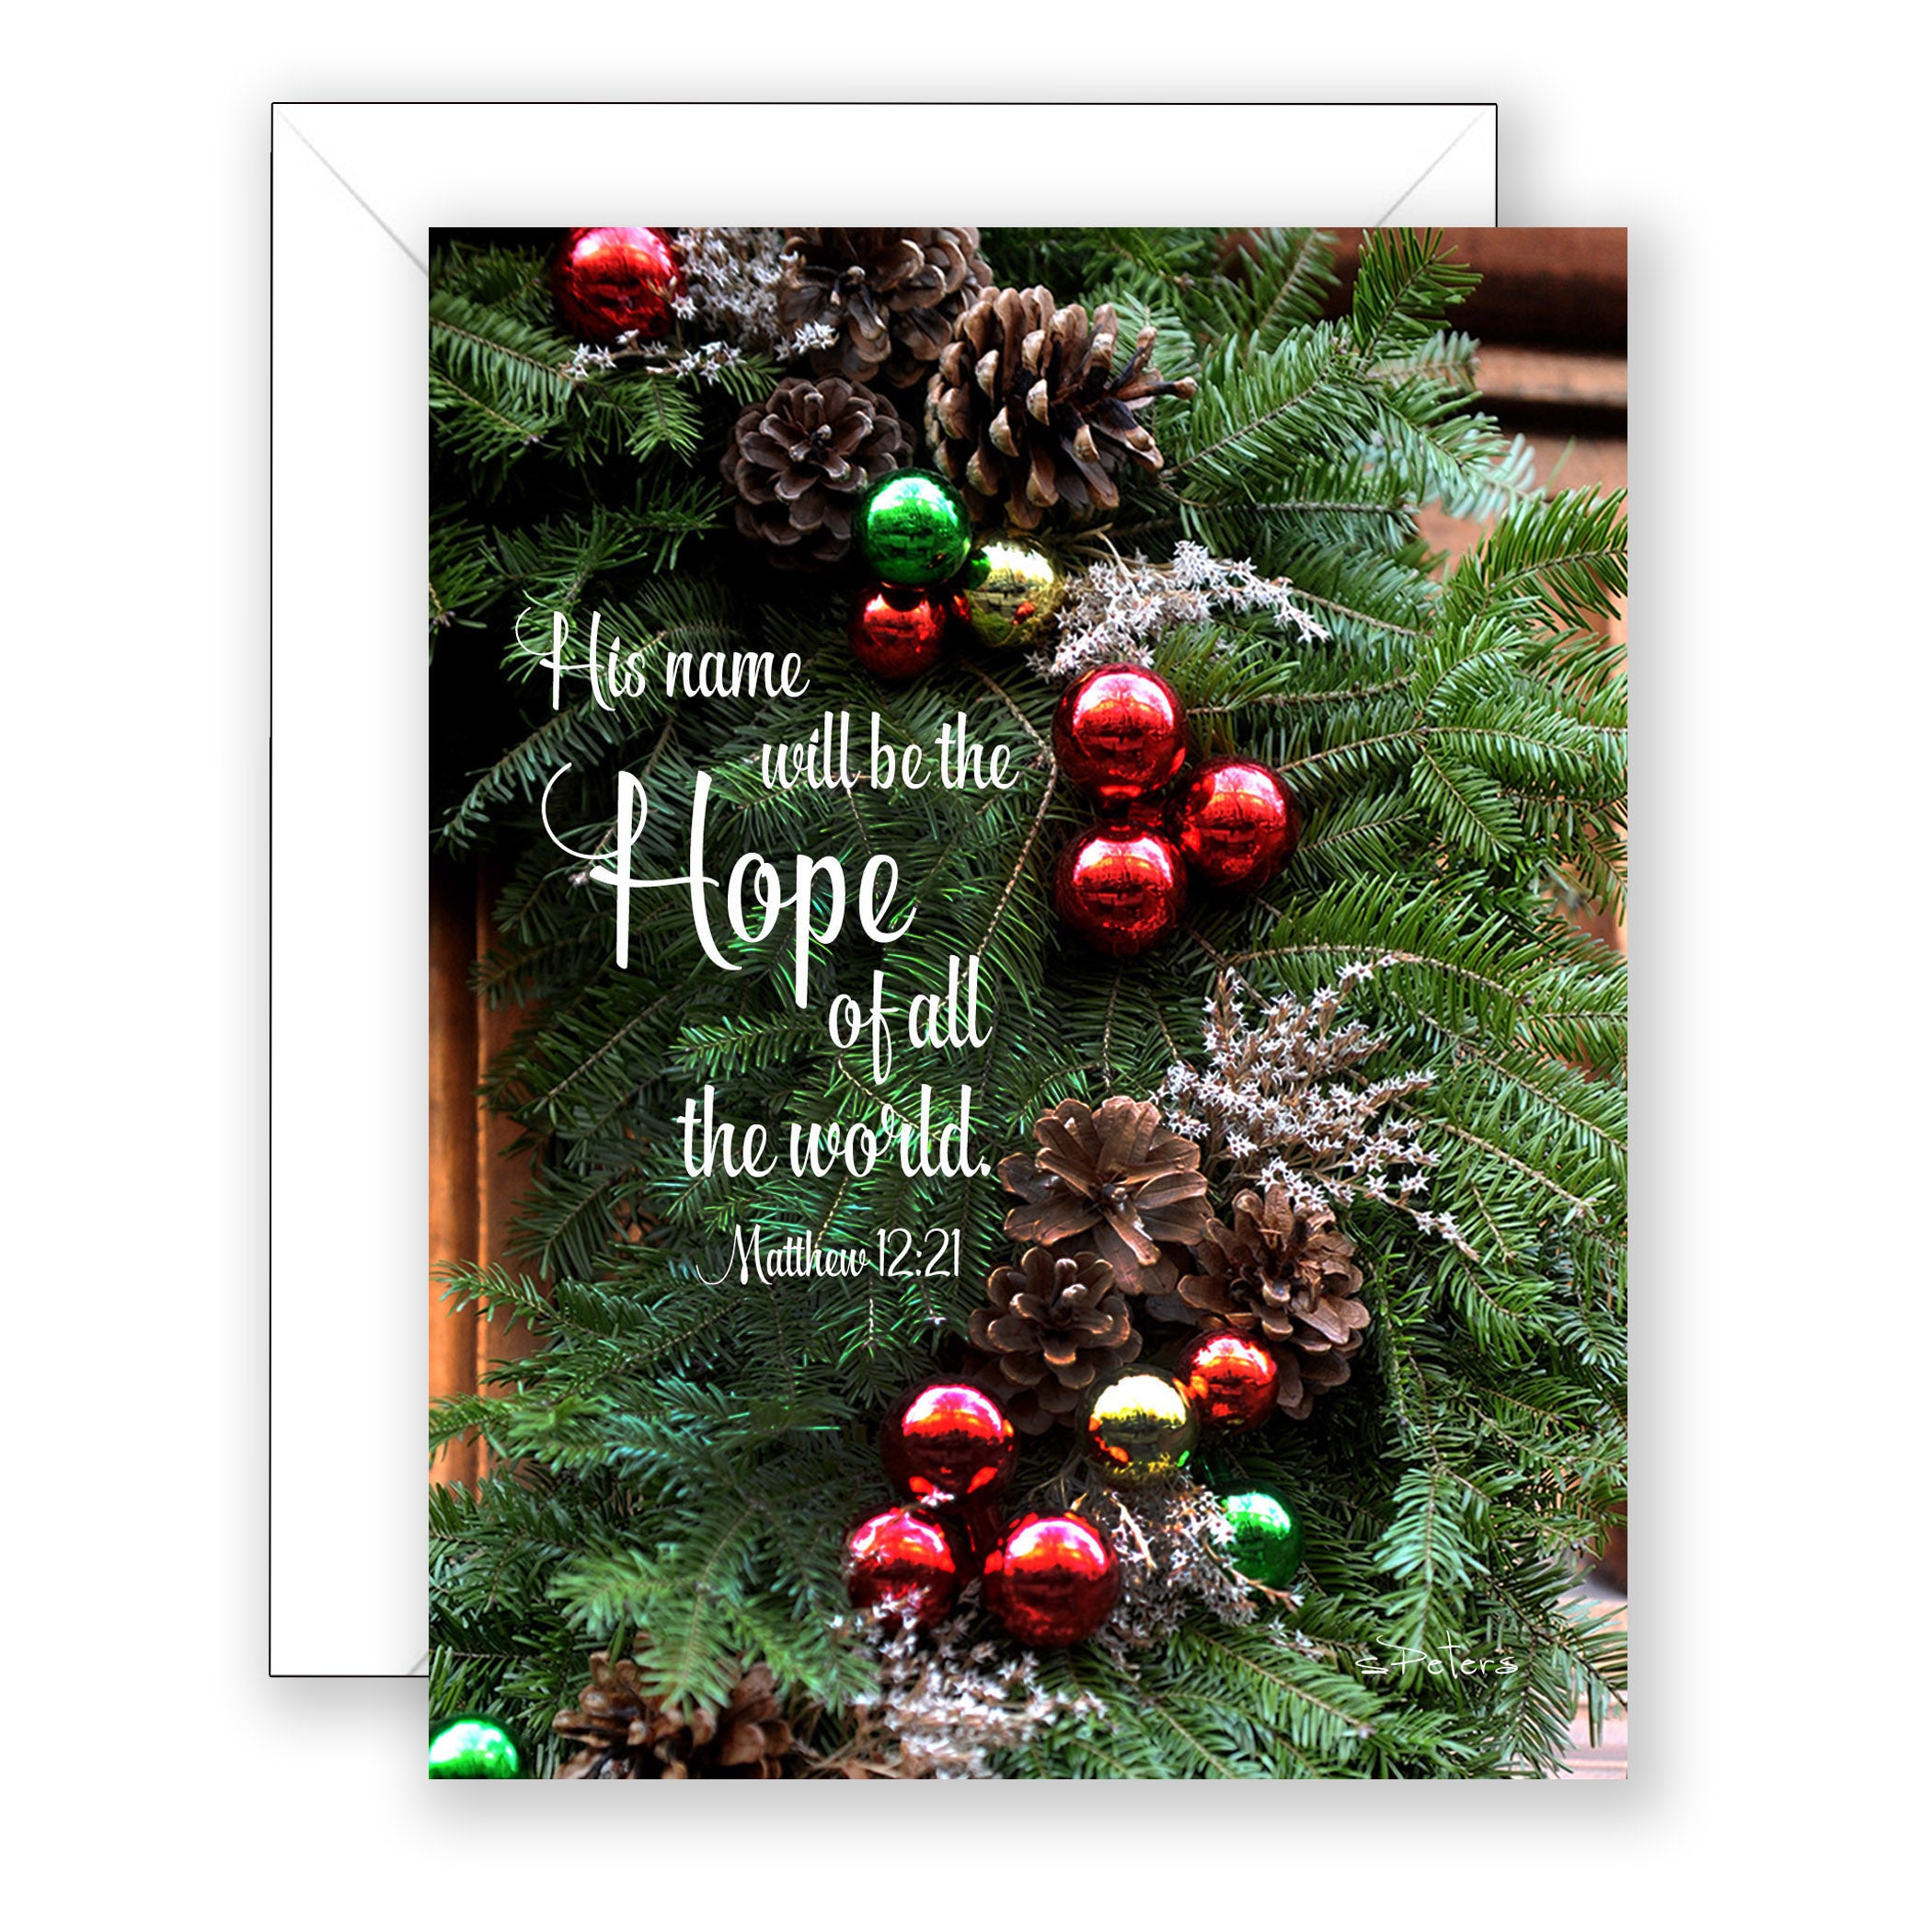 Christmas in the City (Matthew 12:21, Isaiah 9:6) - Christmas Card